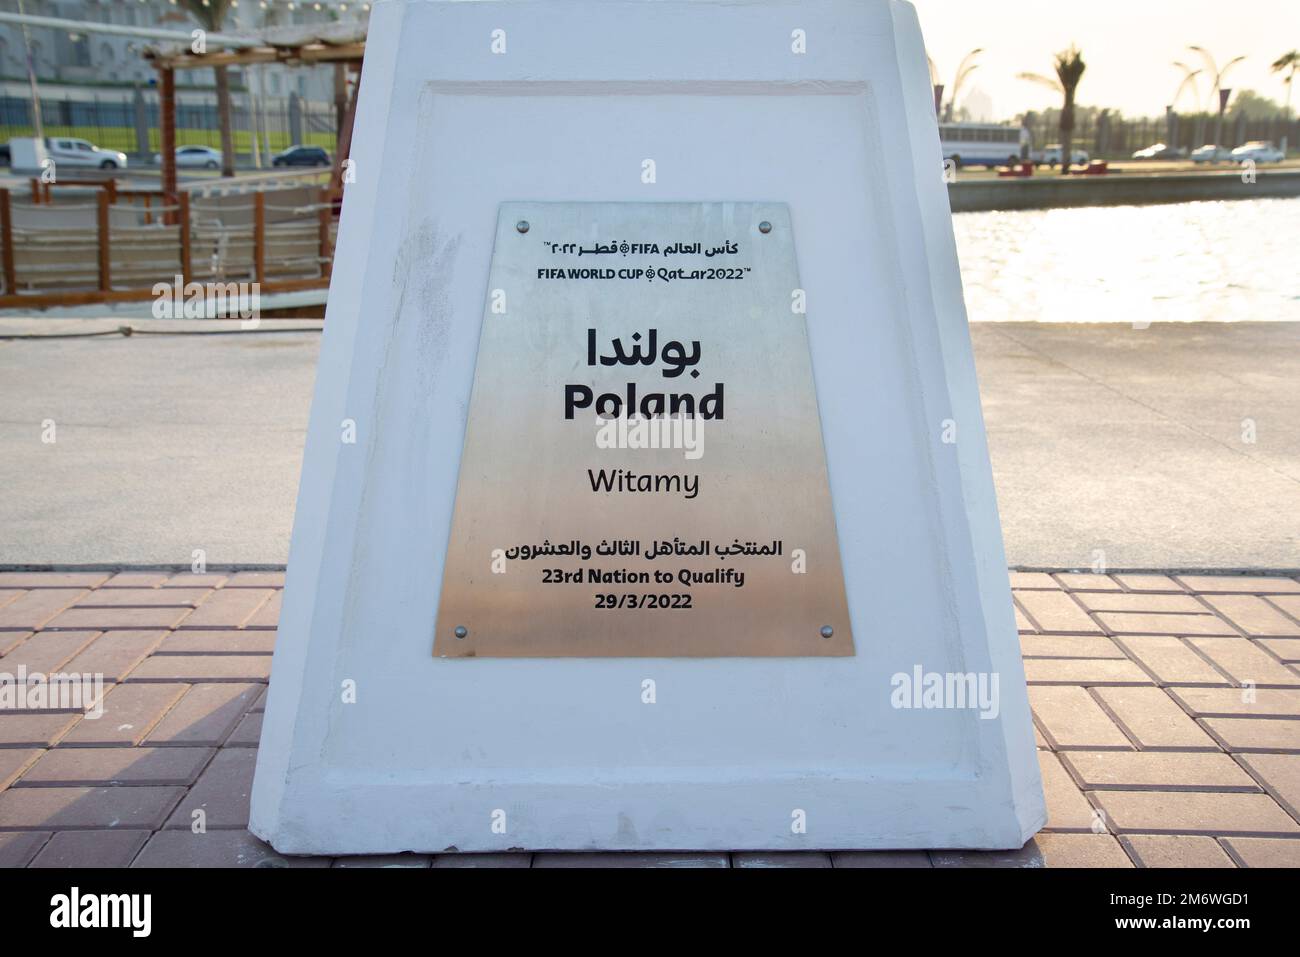 Doha, Qatar - October 6, 2022: FIFA World Cup qualified date plaque for Poland Stock Photo